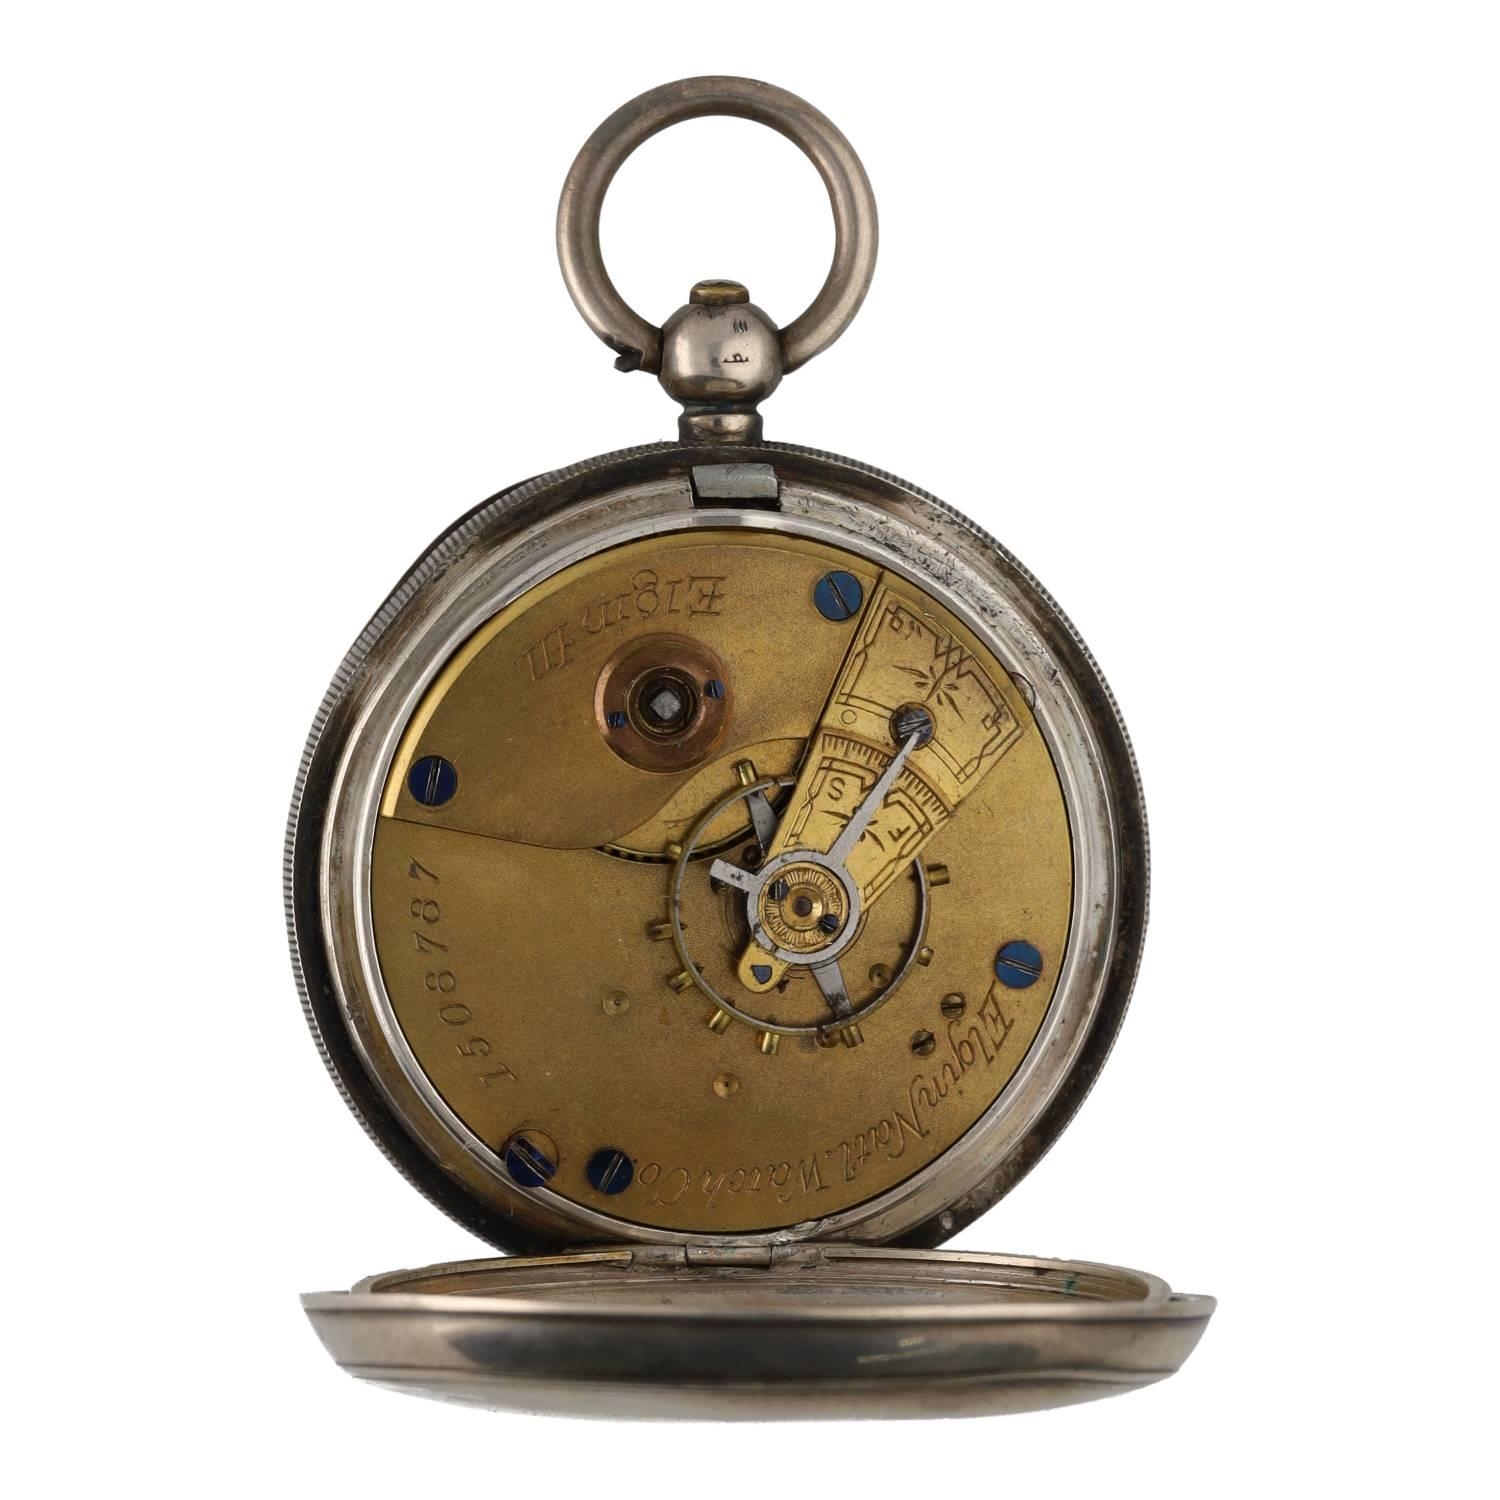 Elgin National Watch Co. silver lever pocket watch, circa 1884, serial no. 1508787, signed - Image 2 of 3